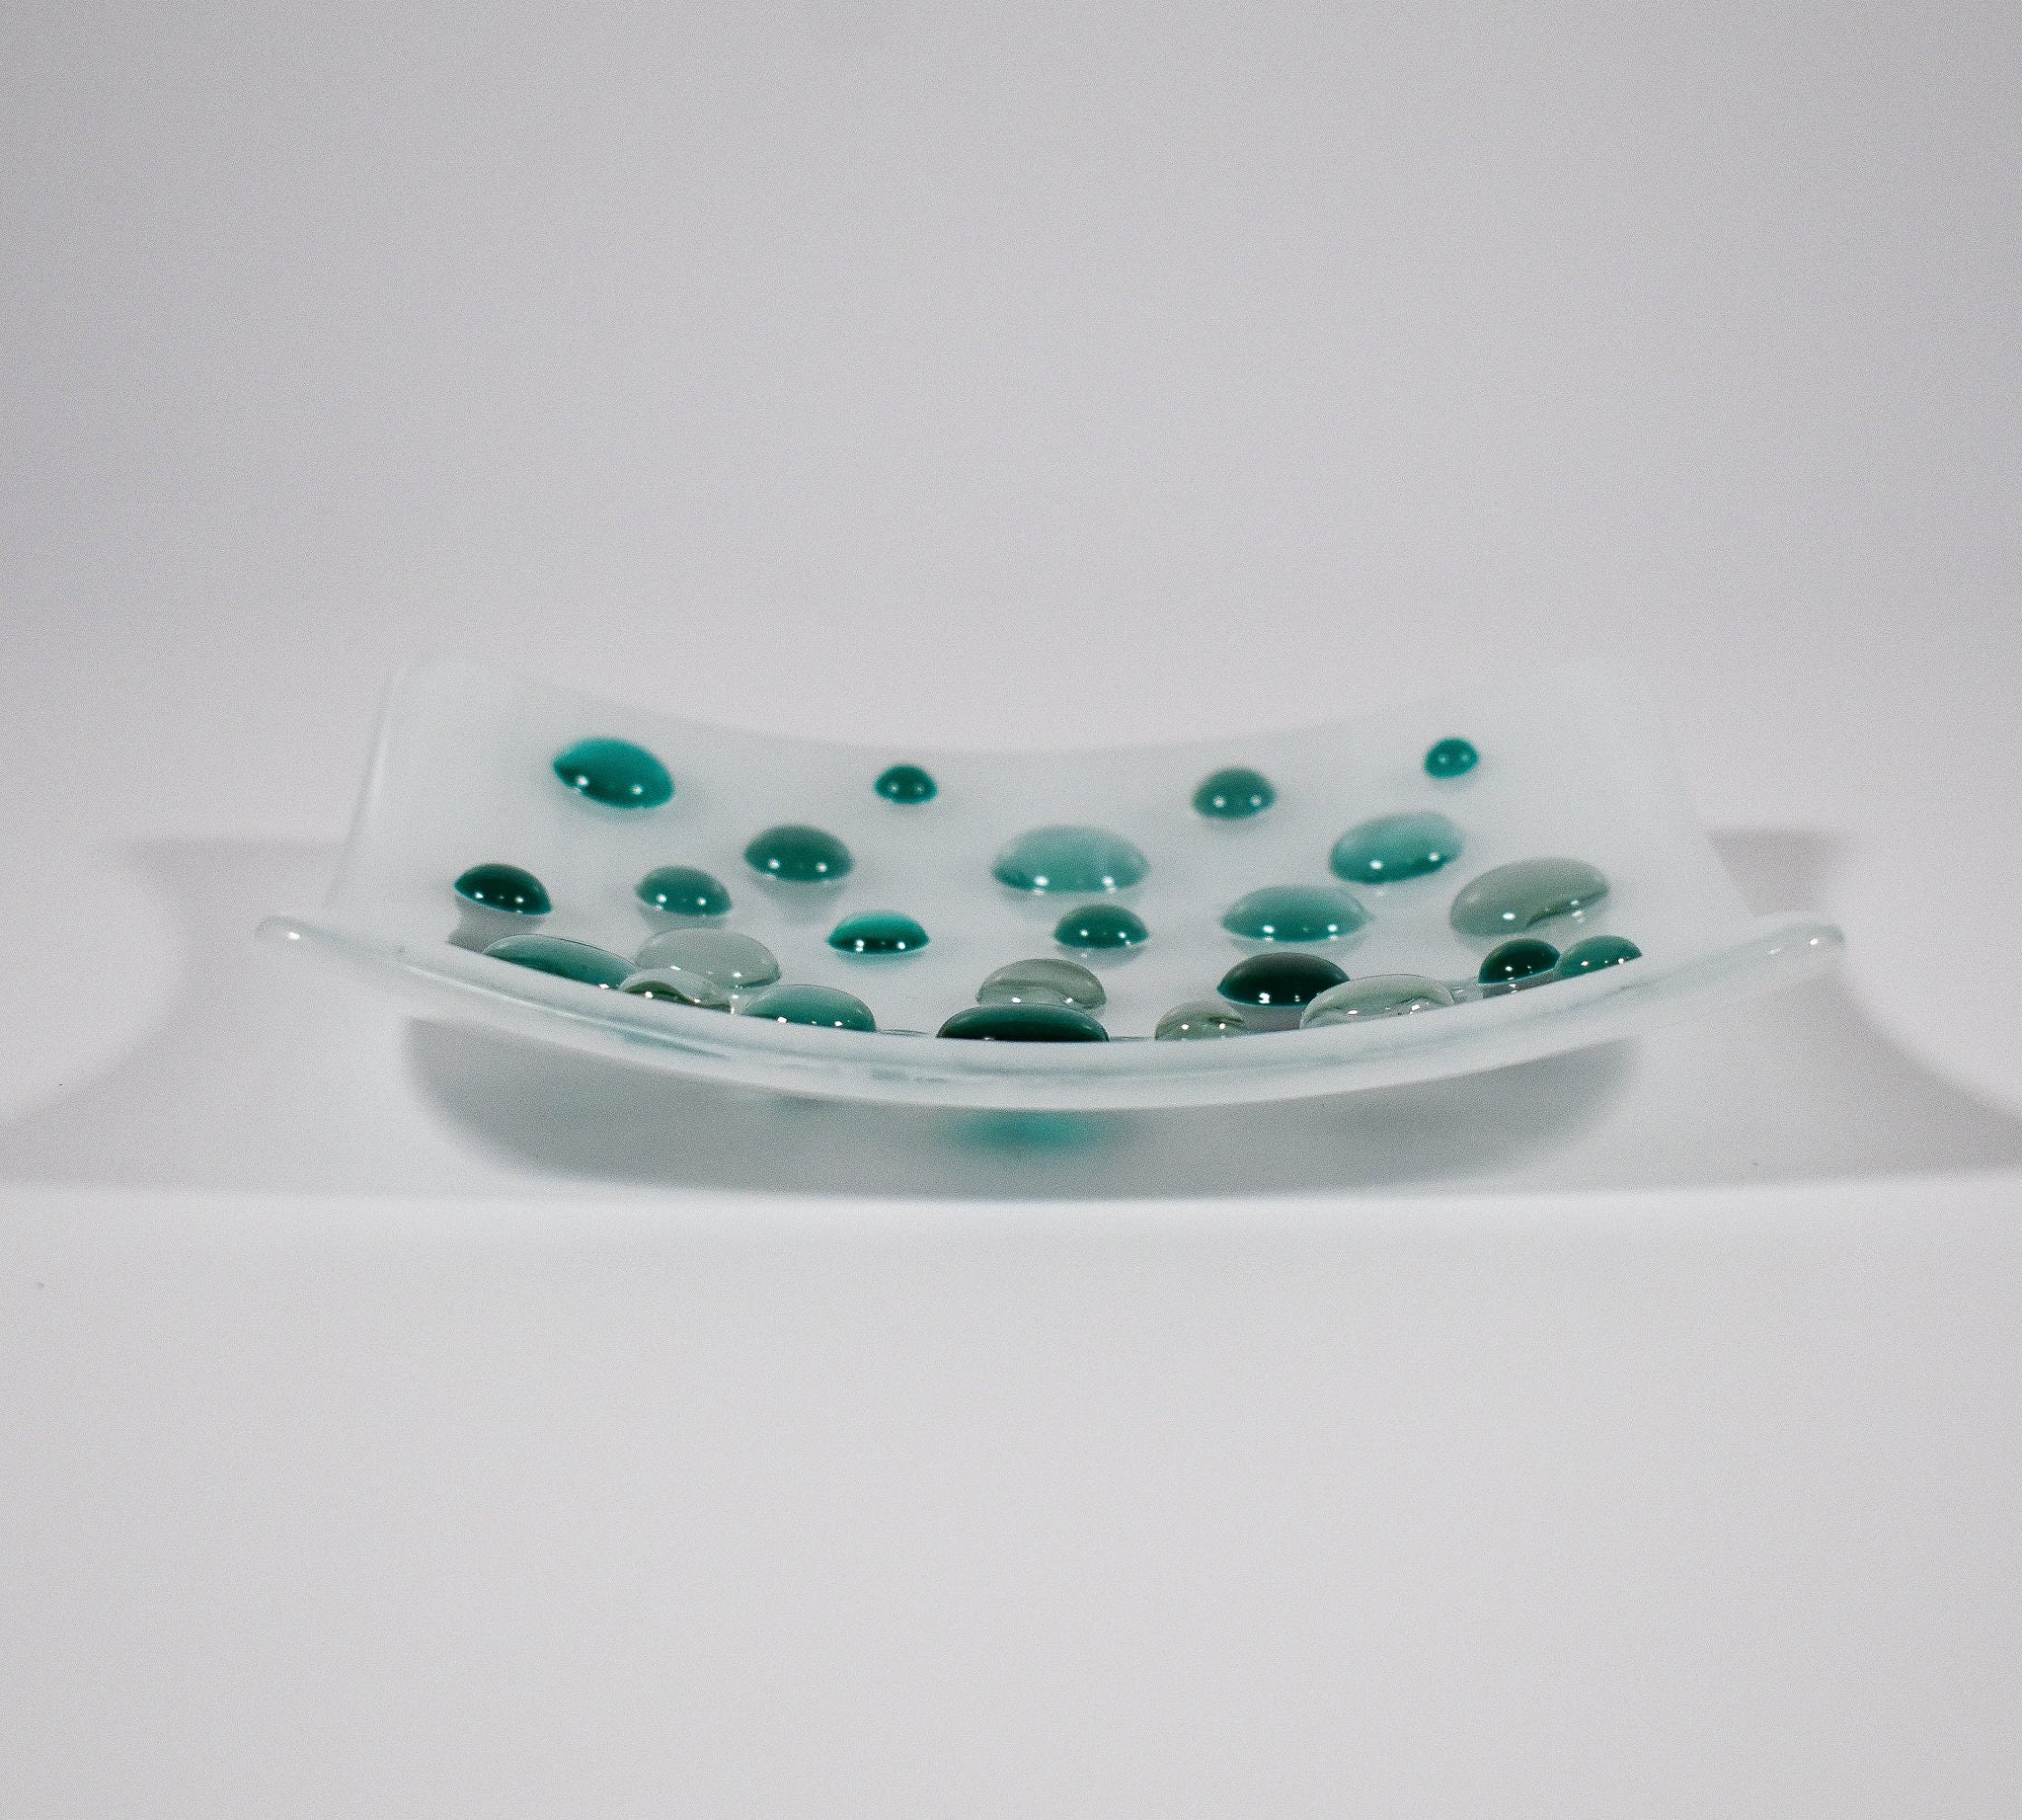 Pure white square glass dish with round glass &quot;dots&quot; in various shades of teal green. Tray is 6&quot; square with sloped corners.